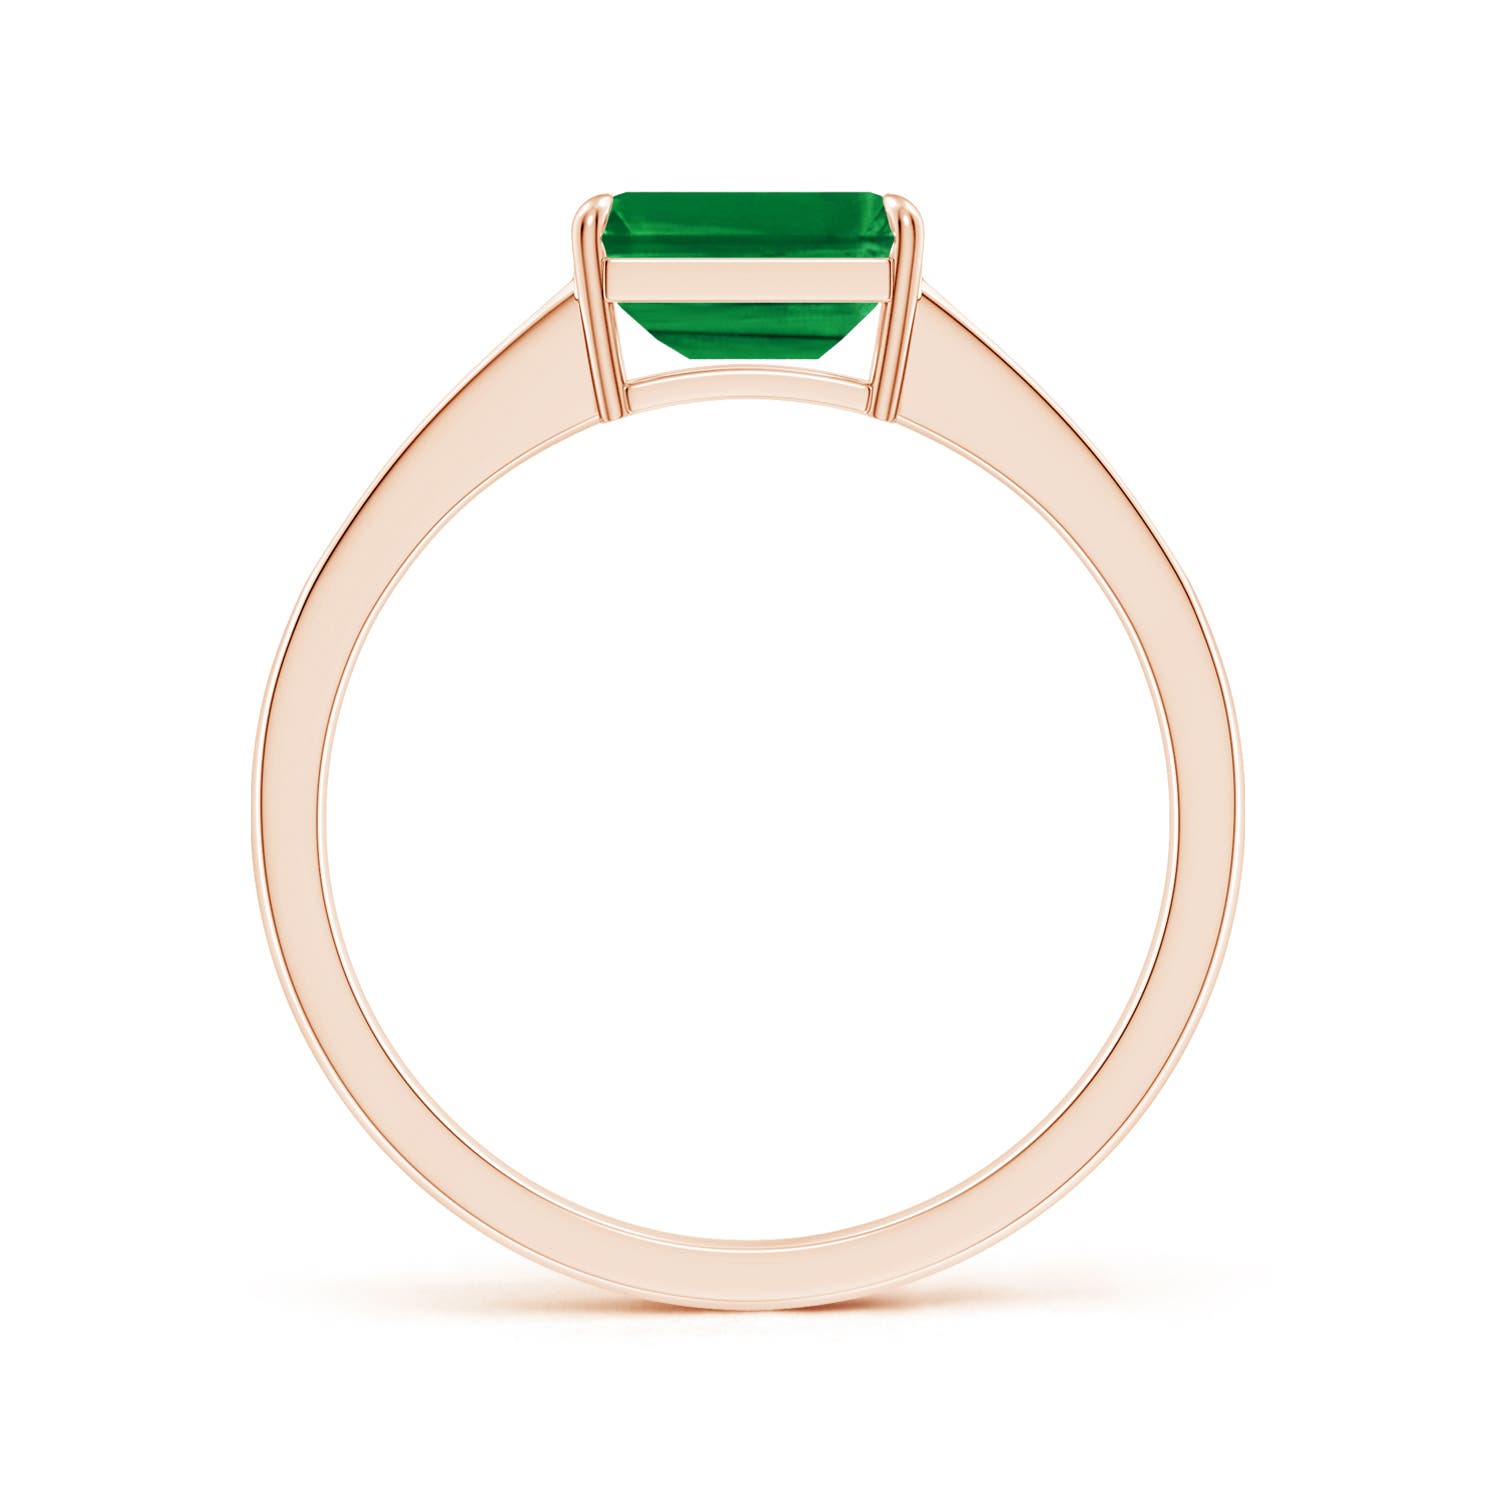 AAA - Emerald / 1.18 CT / 14 KT Rose Gold